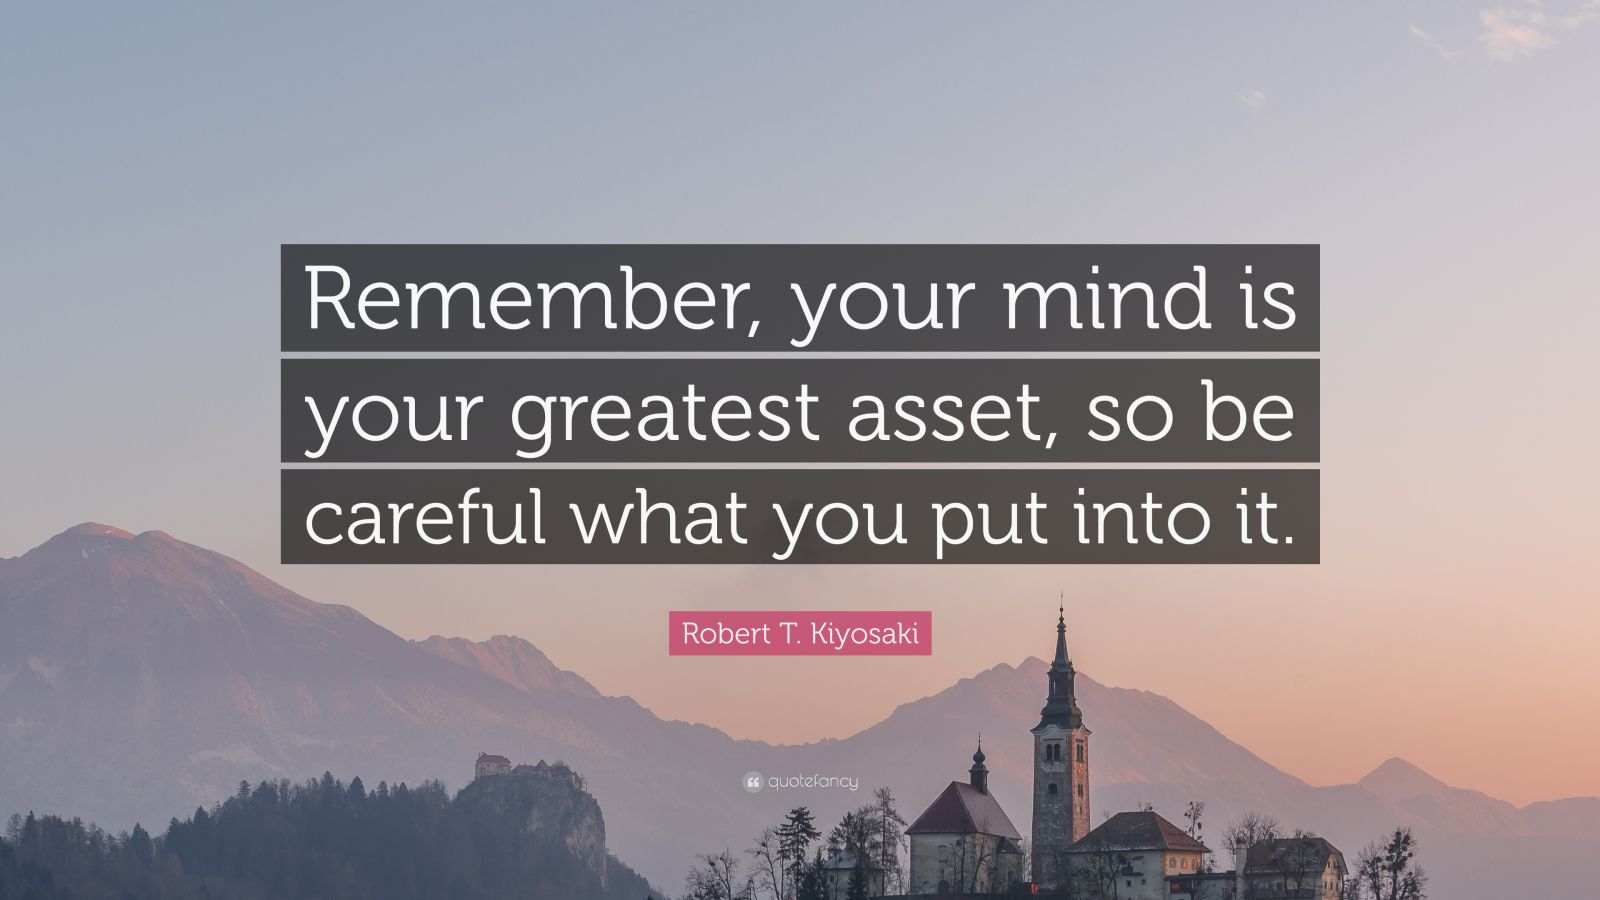 Robert T. Kiyosaki Quote: “Remember, your mind is your greatest asset